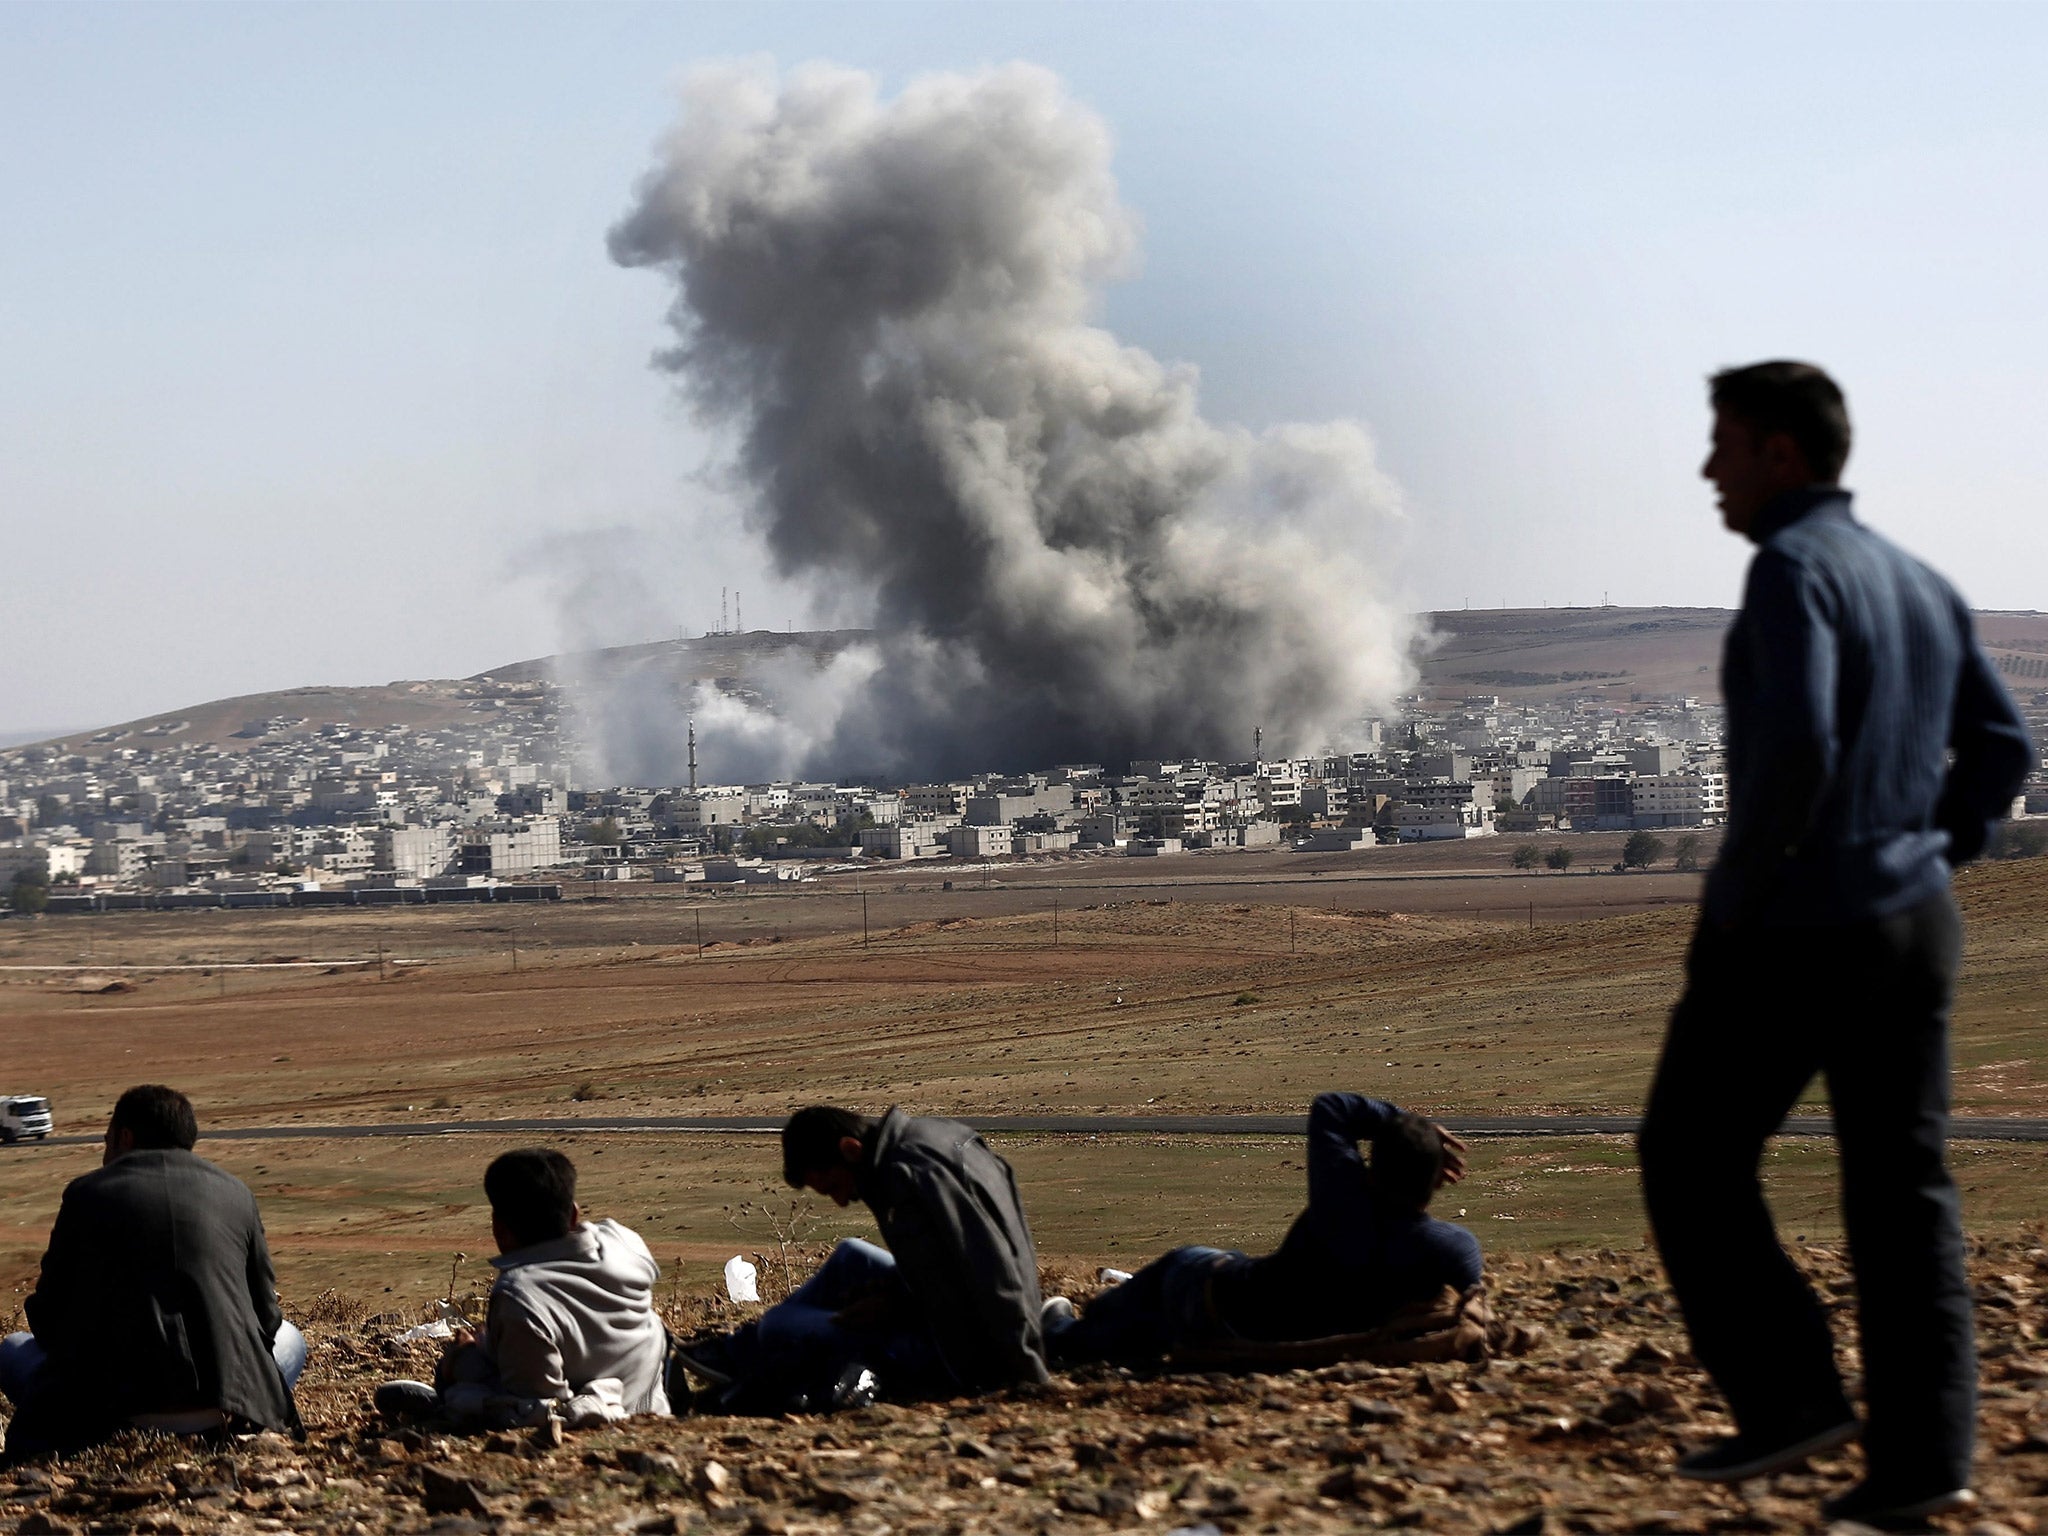 People watch an explosion after an apparent US-led coalition airstrike on Kobani, Syria